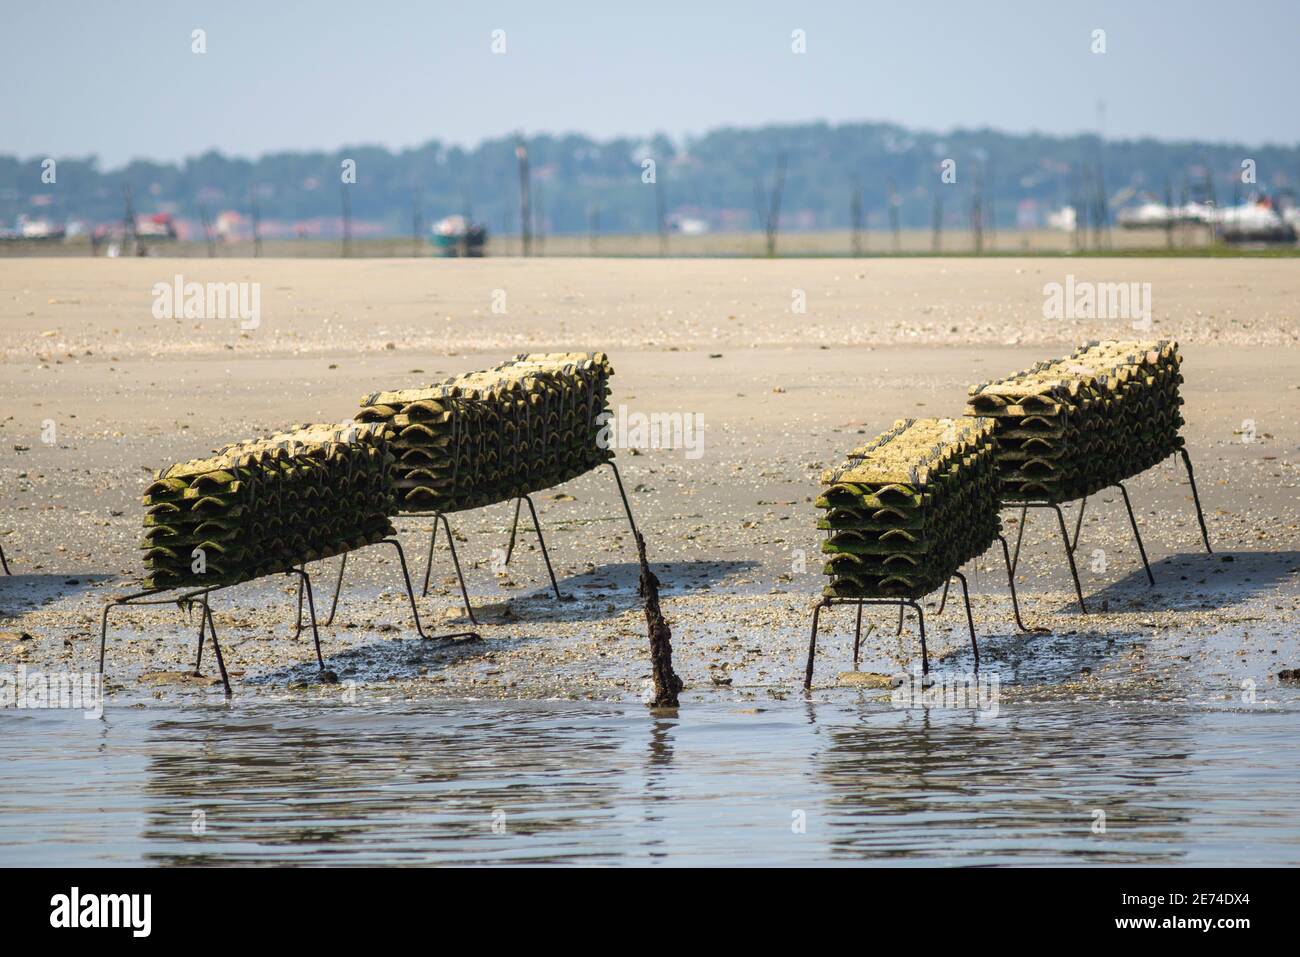 Oyster farming structures in the Bassin d'Arcachon, Gironde, France, Europe. With low tide in the Atlantic Ocean, structures come out of the water Stock Photo